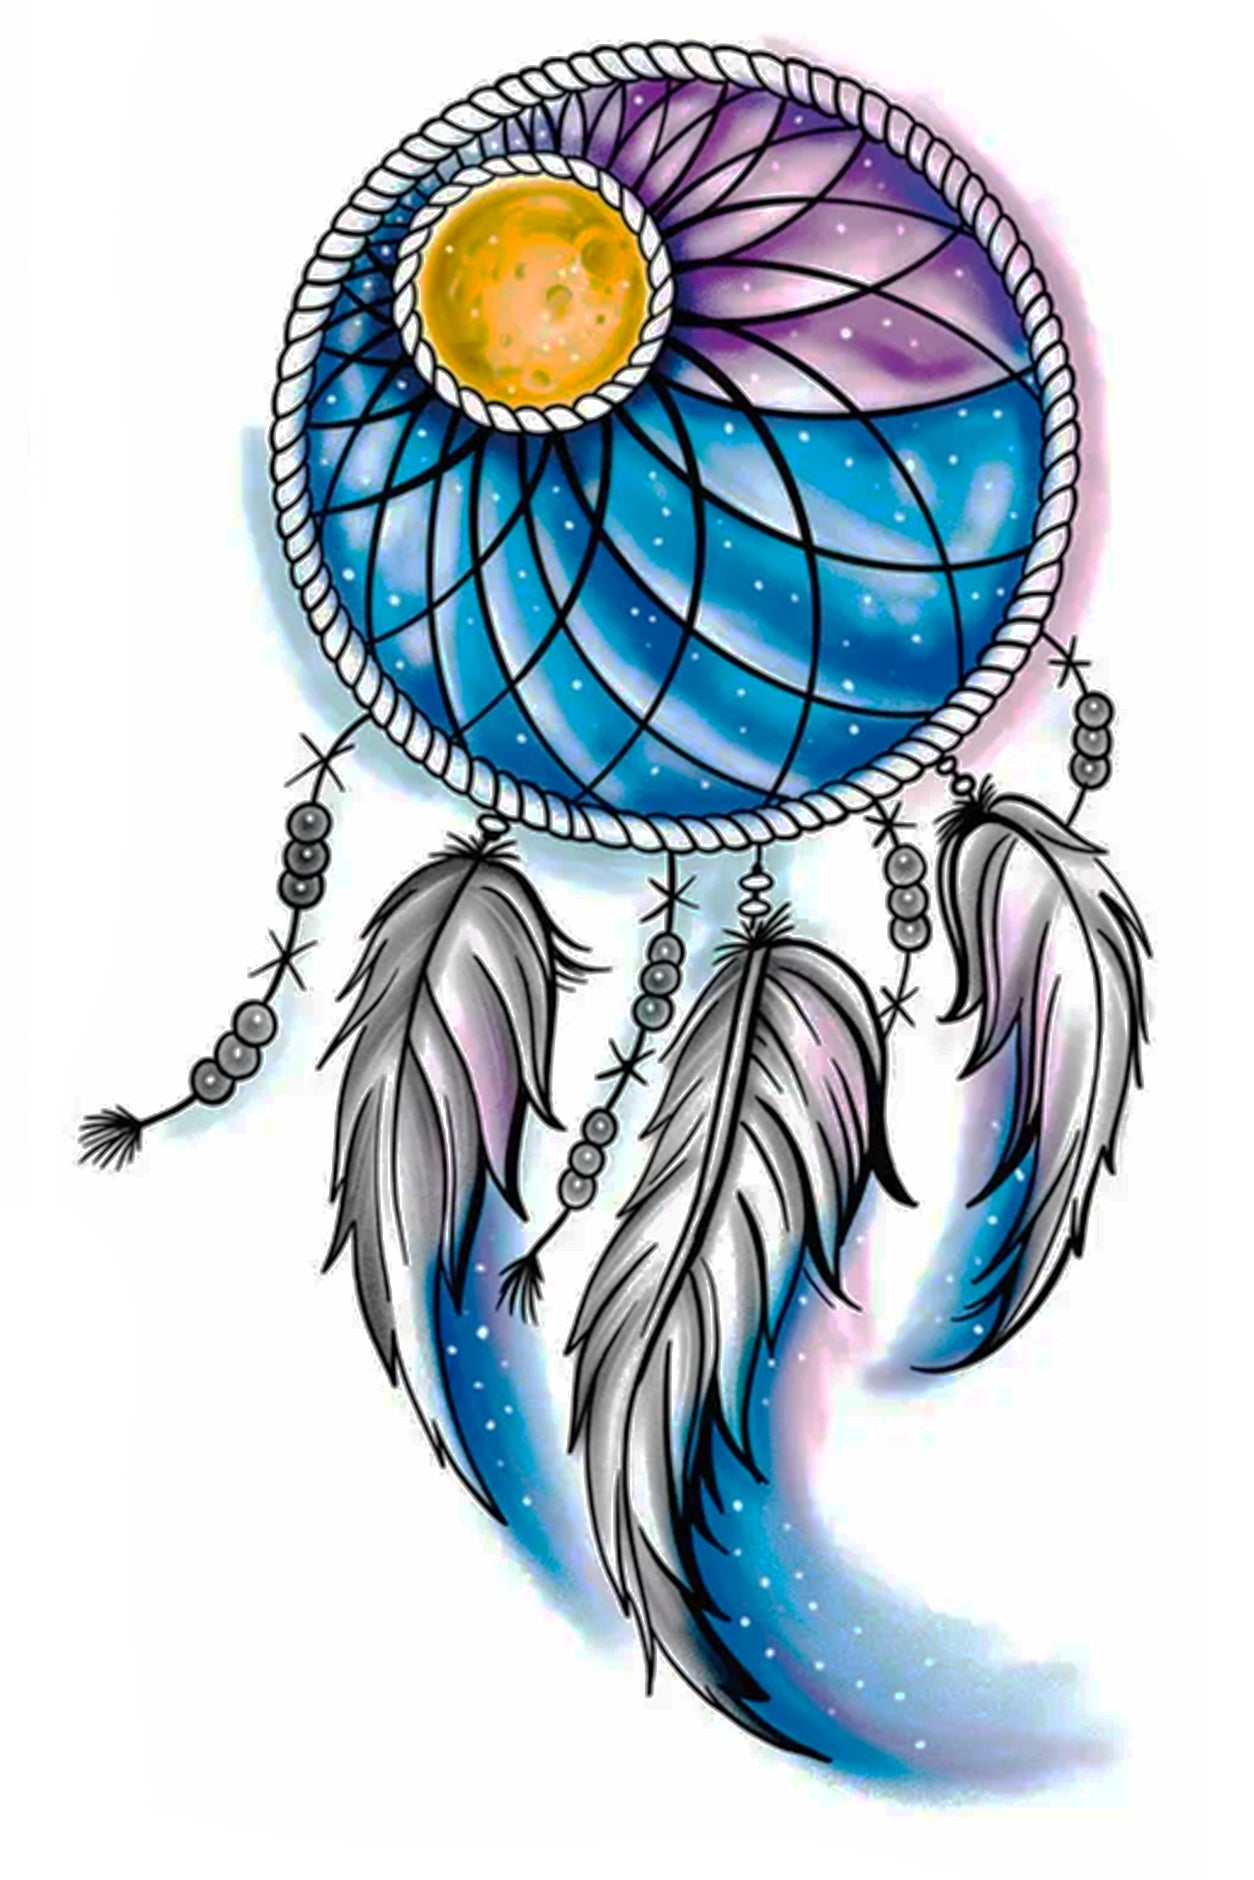 Dream Catchers are often referred to as “Sacred Hoops.” They can be traced back to the Ojibwe Native American tribe, where they were initially used as talismans to protect sleepers from bad dreams by holding the bad dreams in their web until morning. This web is designed as a flower with a golden moon and three matching soft feathers and beads.